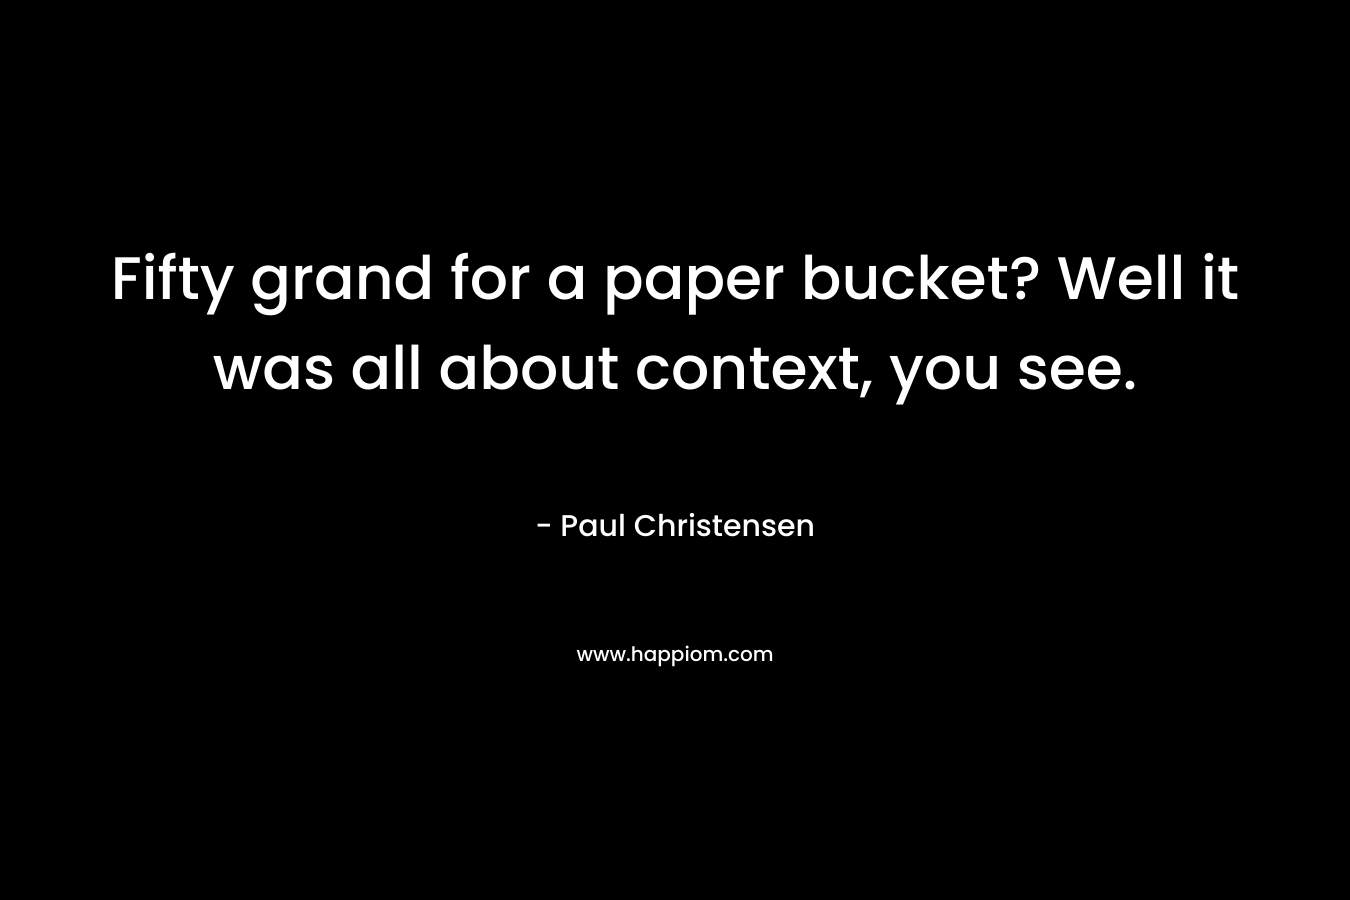 Fifty grand for a paper bucket? Well it was all about context, you see. – Paul Christensen